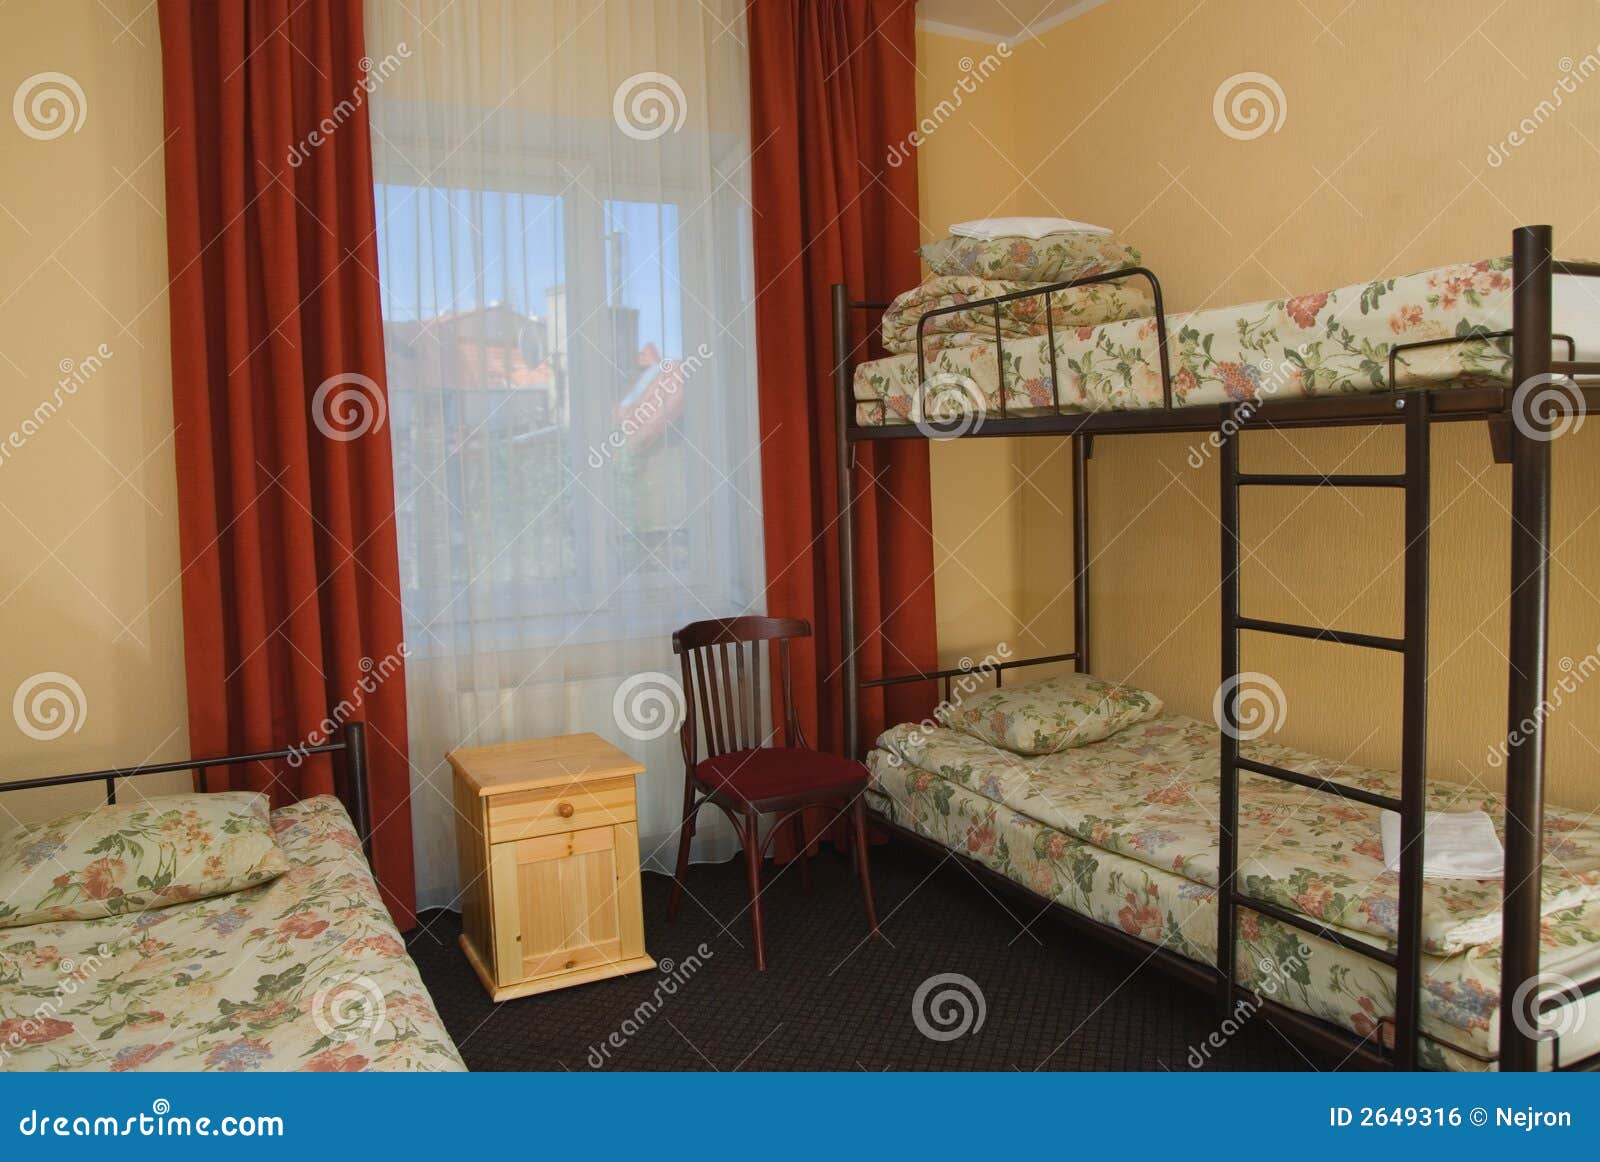 hostel room with city view